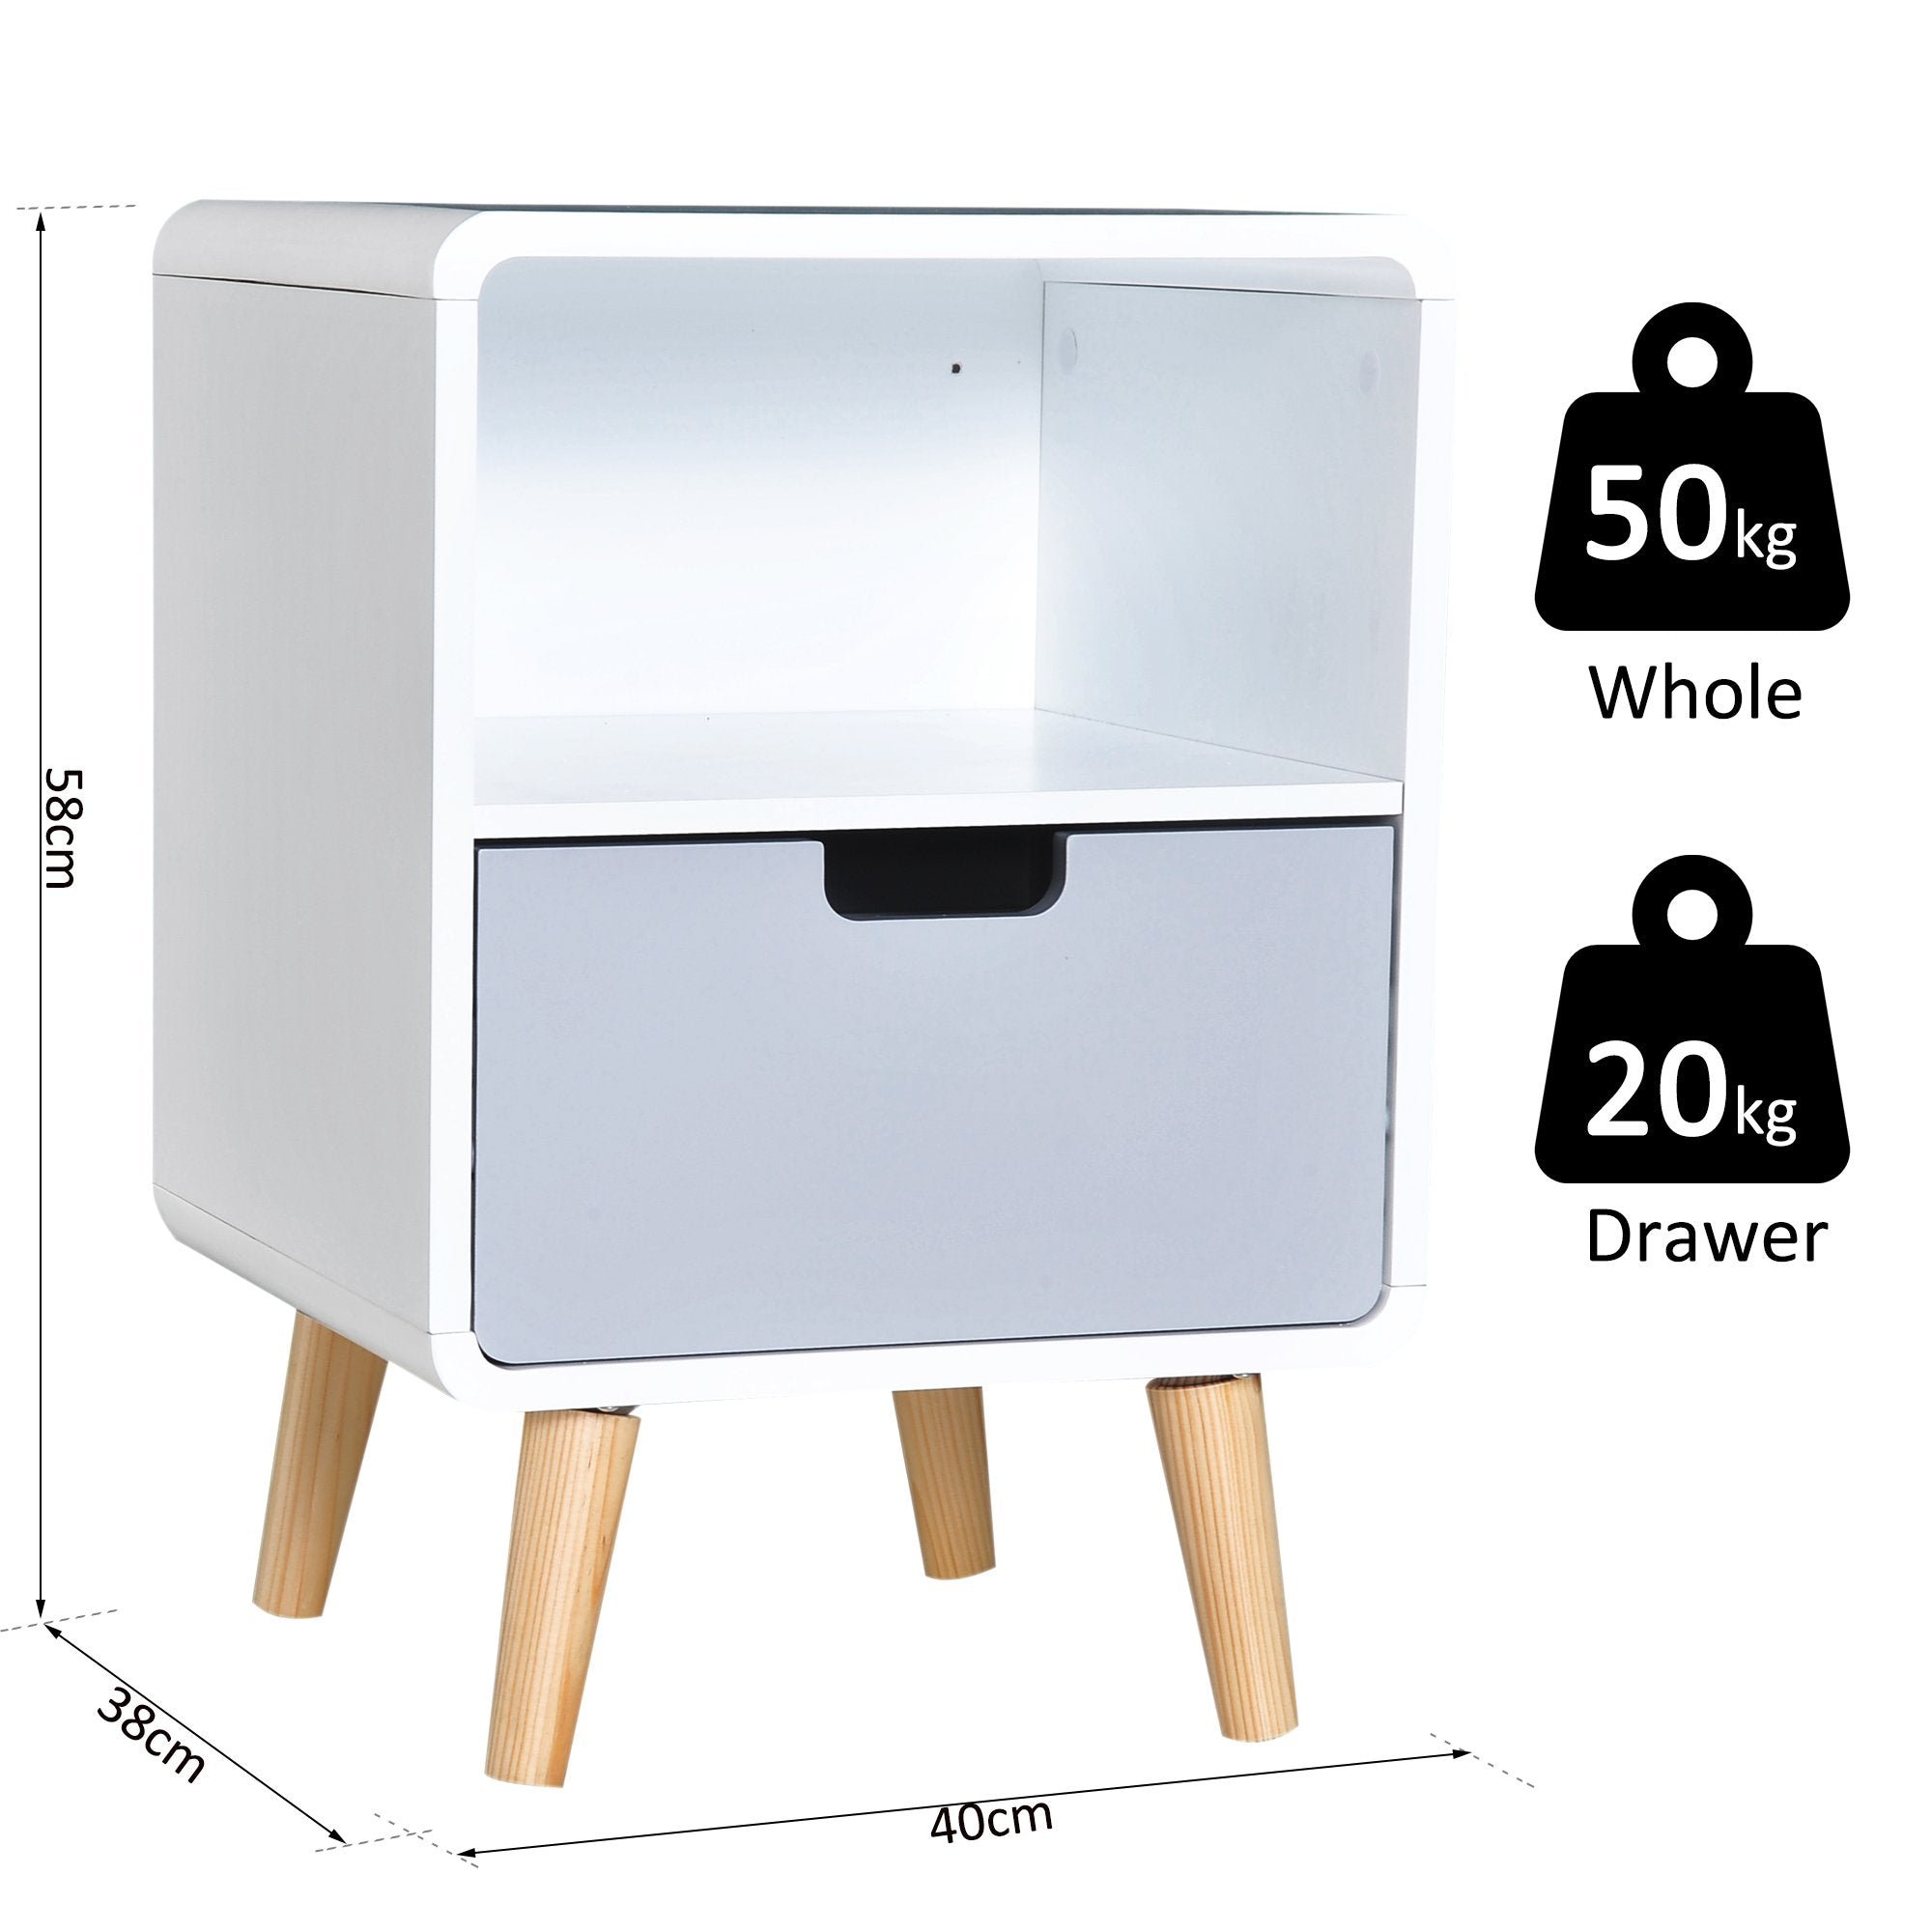 HOMCOM Scandinavian Style Bedside Table, 40Lx38Wx58H cm-White/Grey/Natural Wood Colour - Inspirely